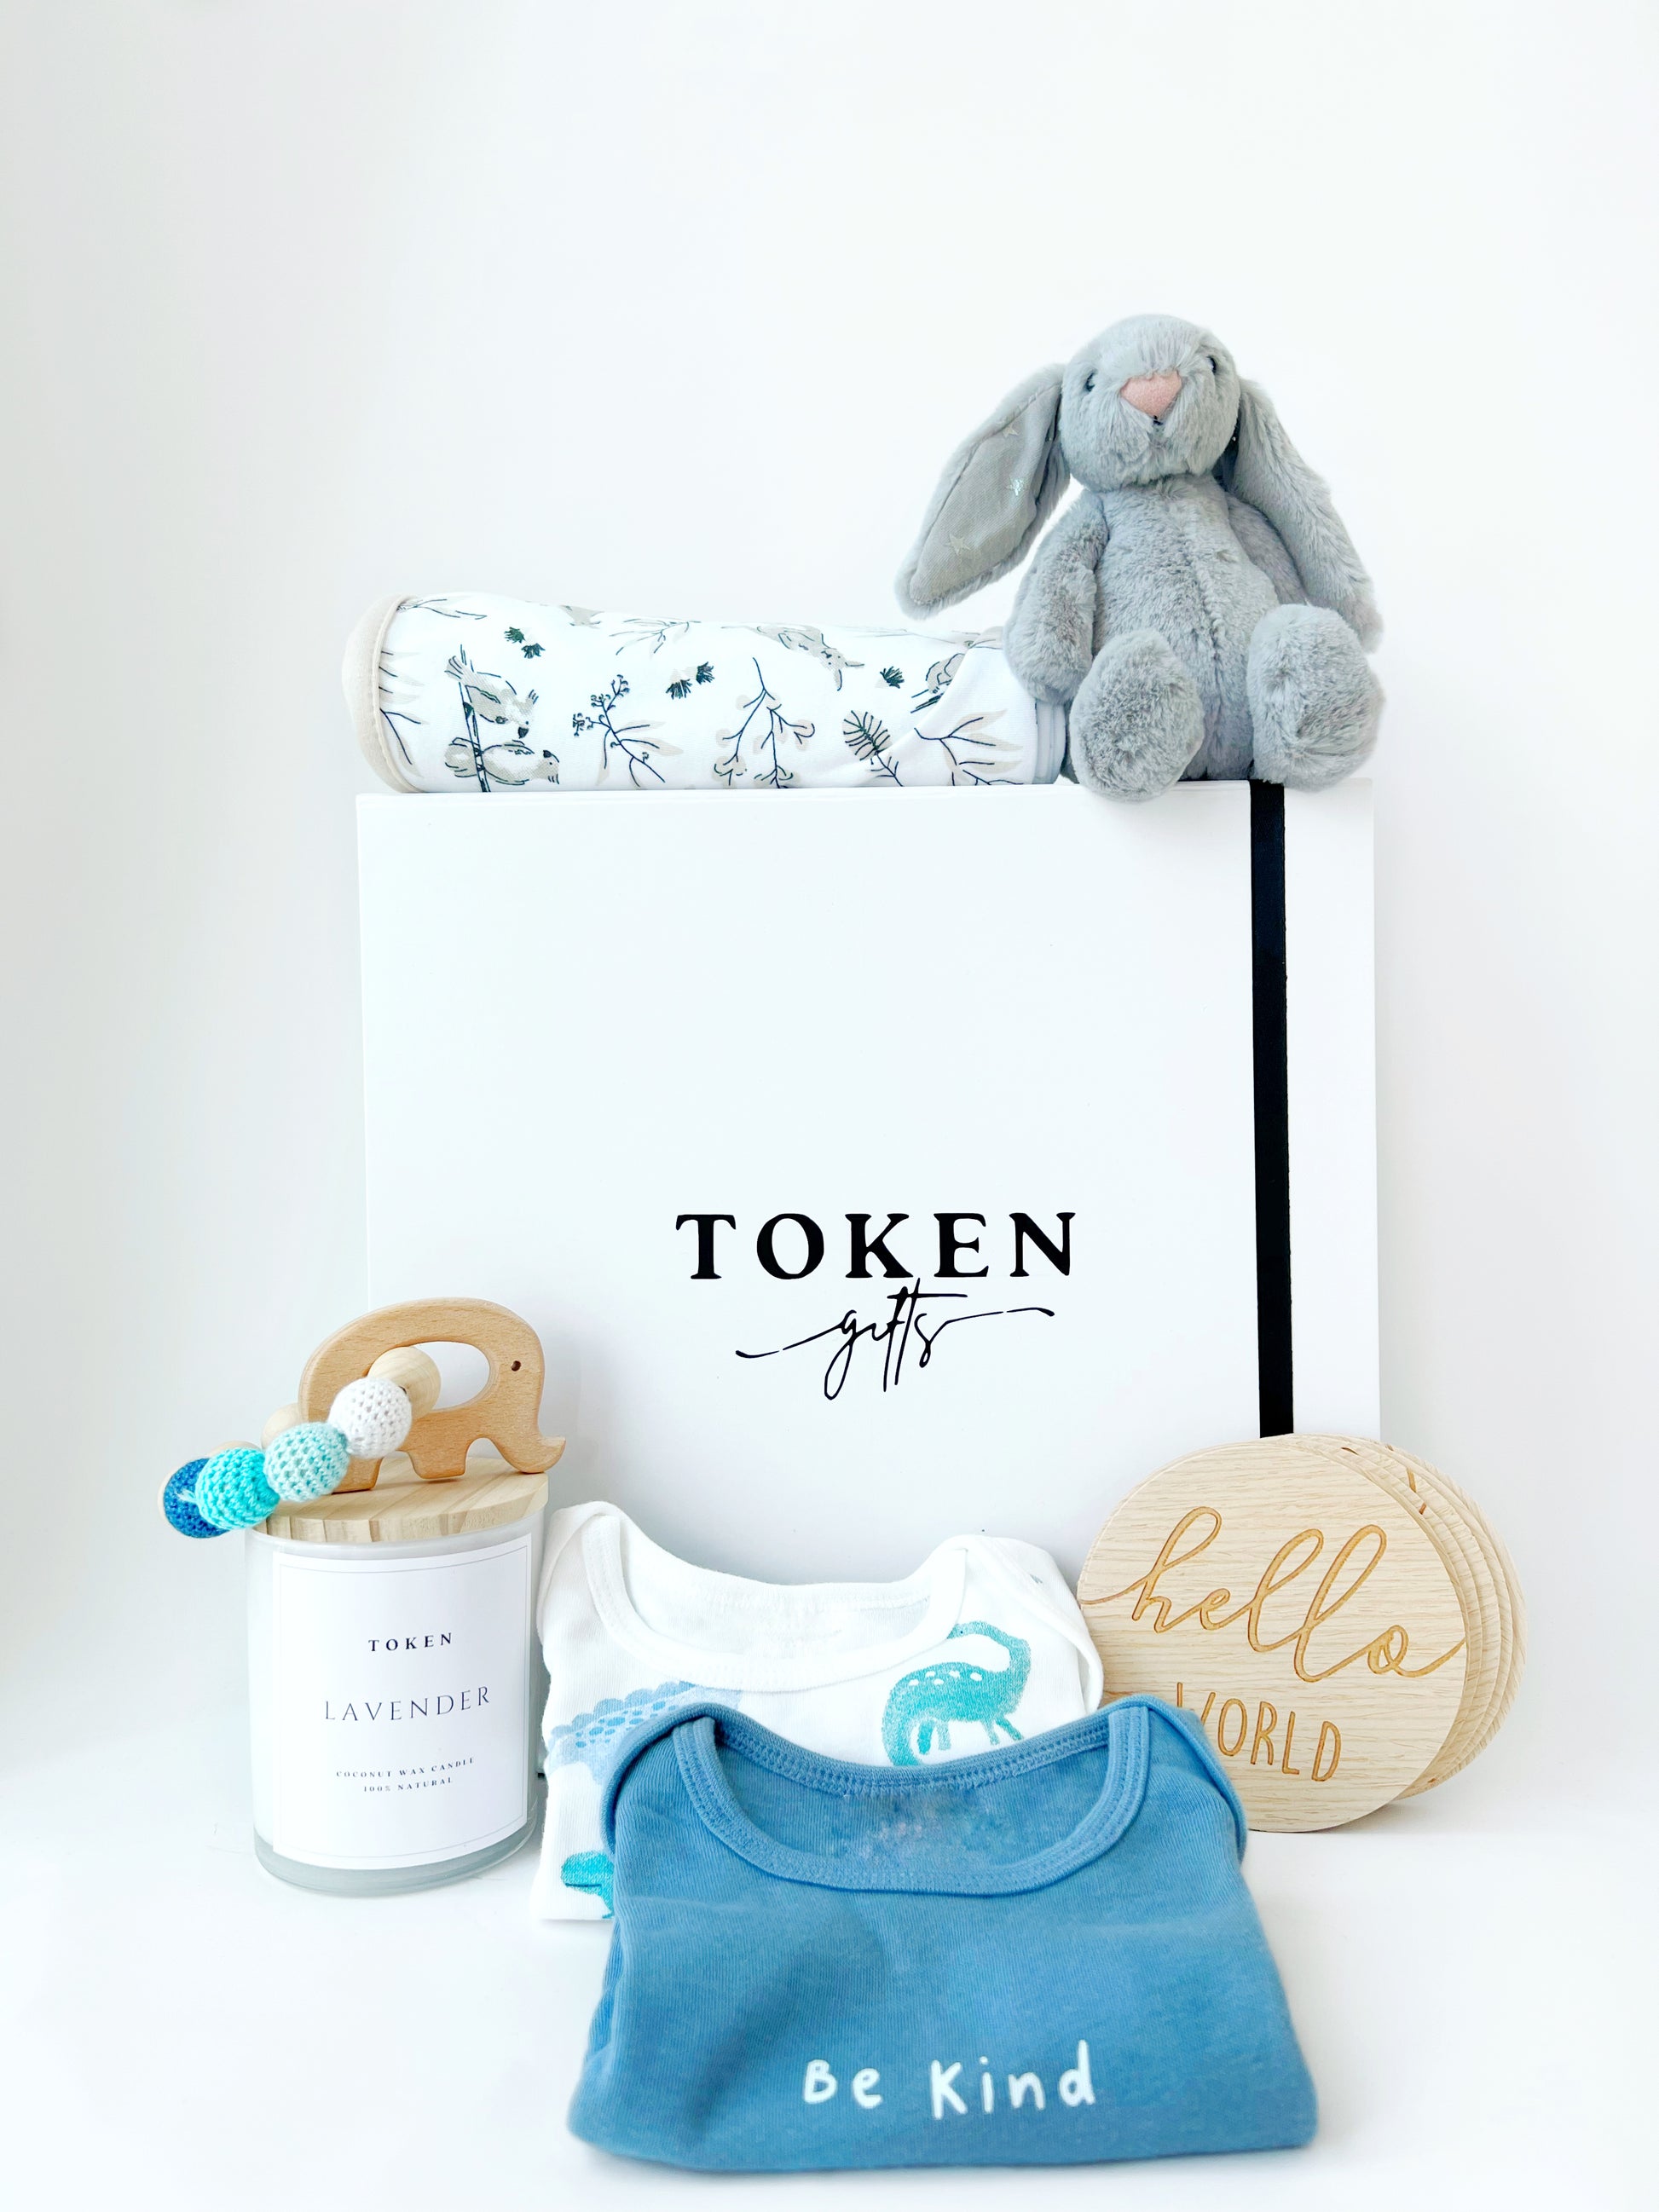 Baby Boy Shower Gift. Includes Jellycat Bunny, Milestone Discs, Rattle, Candle, wrap and onsies.